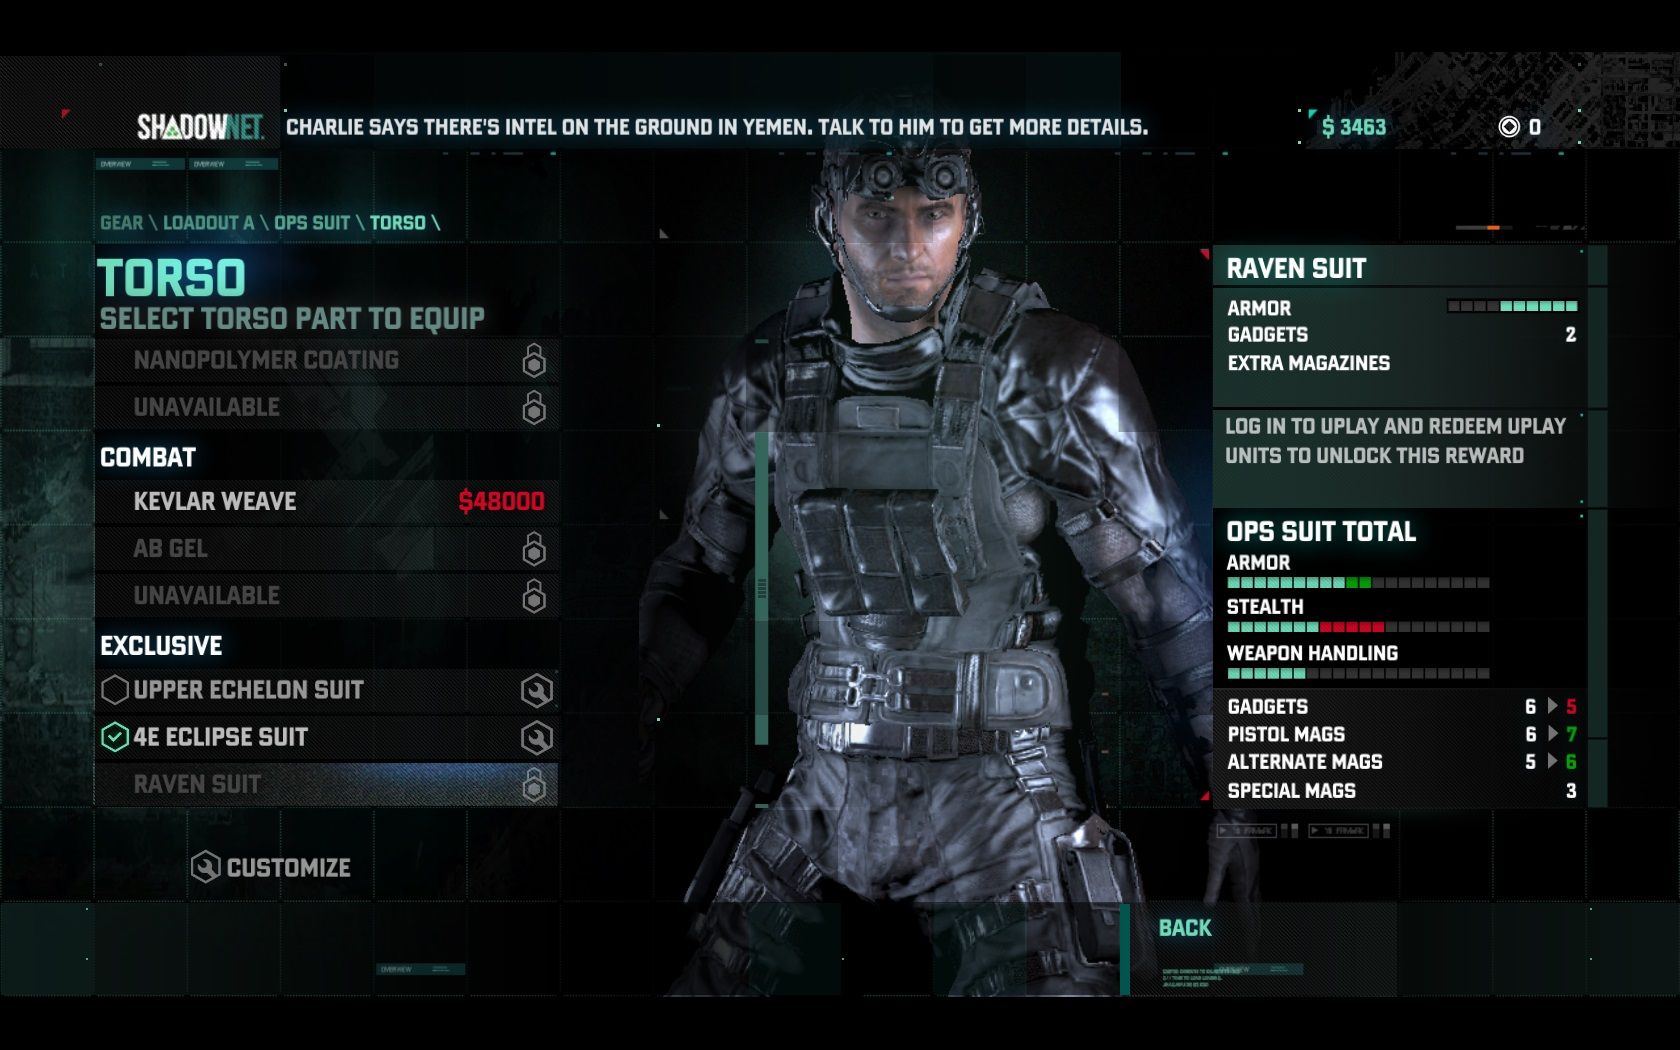 15 Ways Splinter Cell Blows Metal Gear Solid Out Of The Water